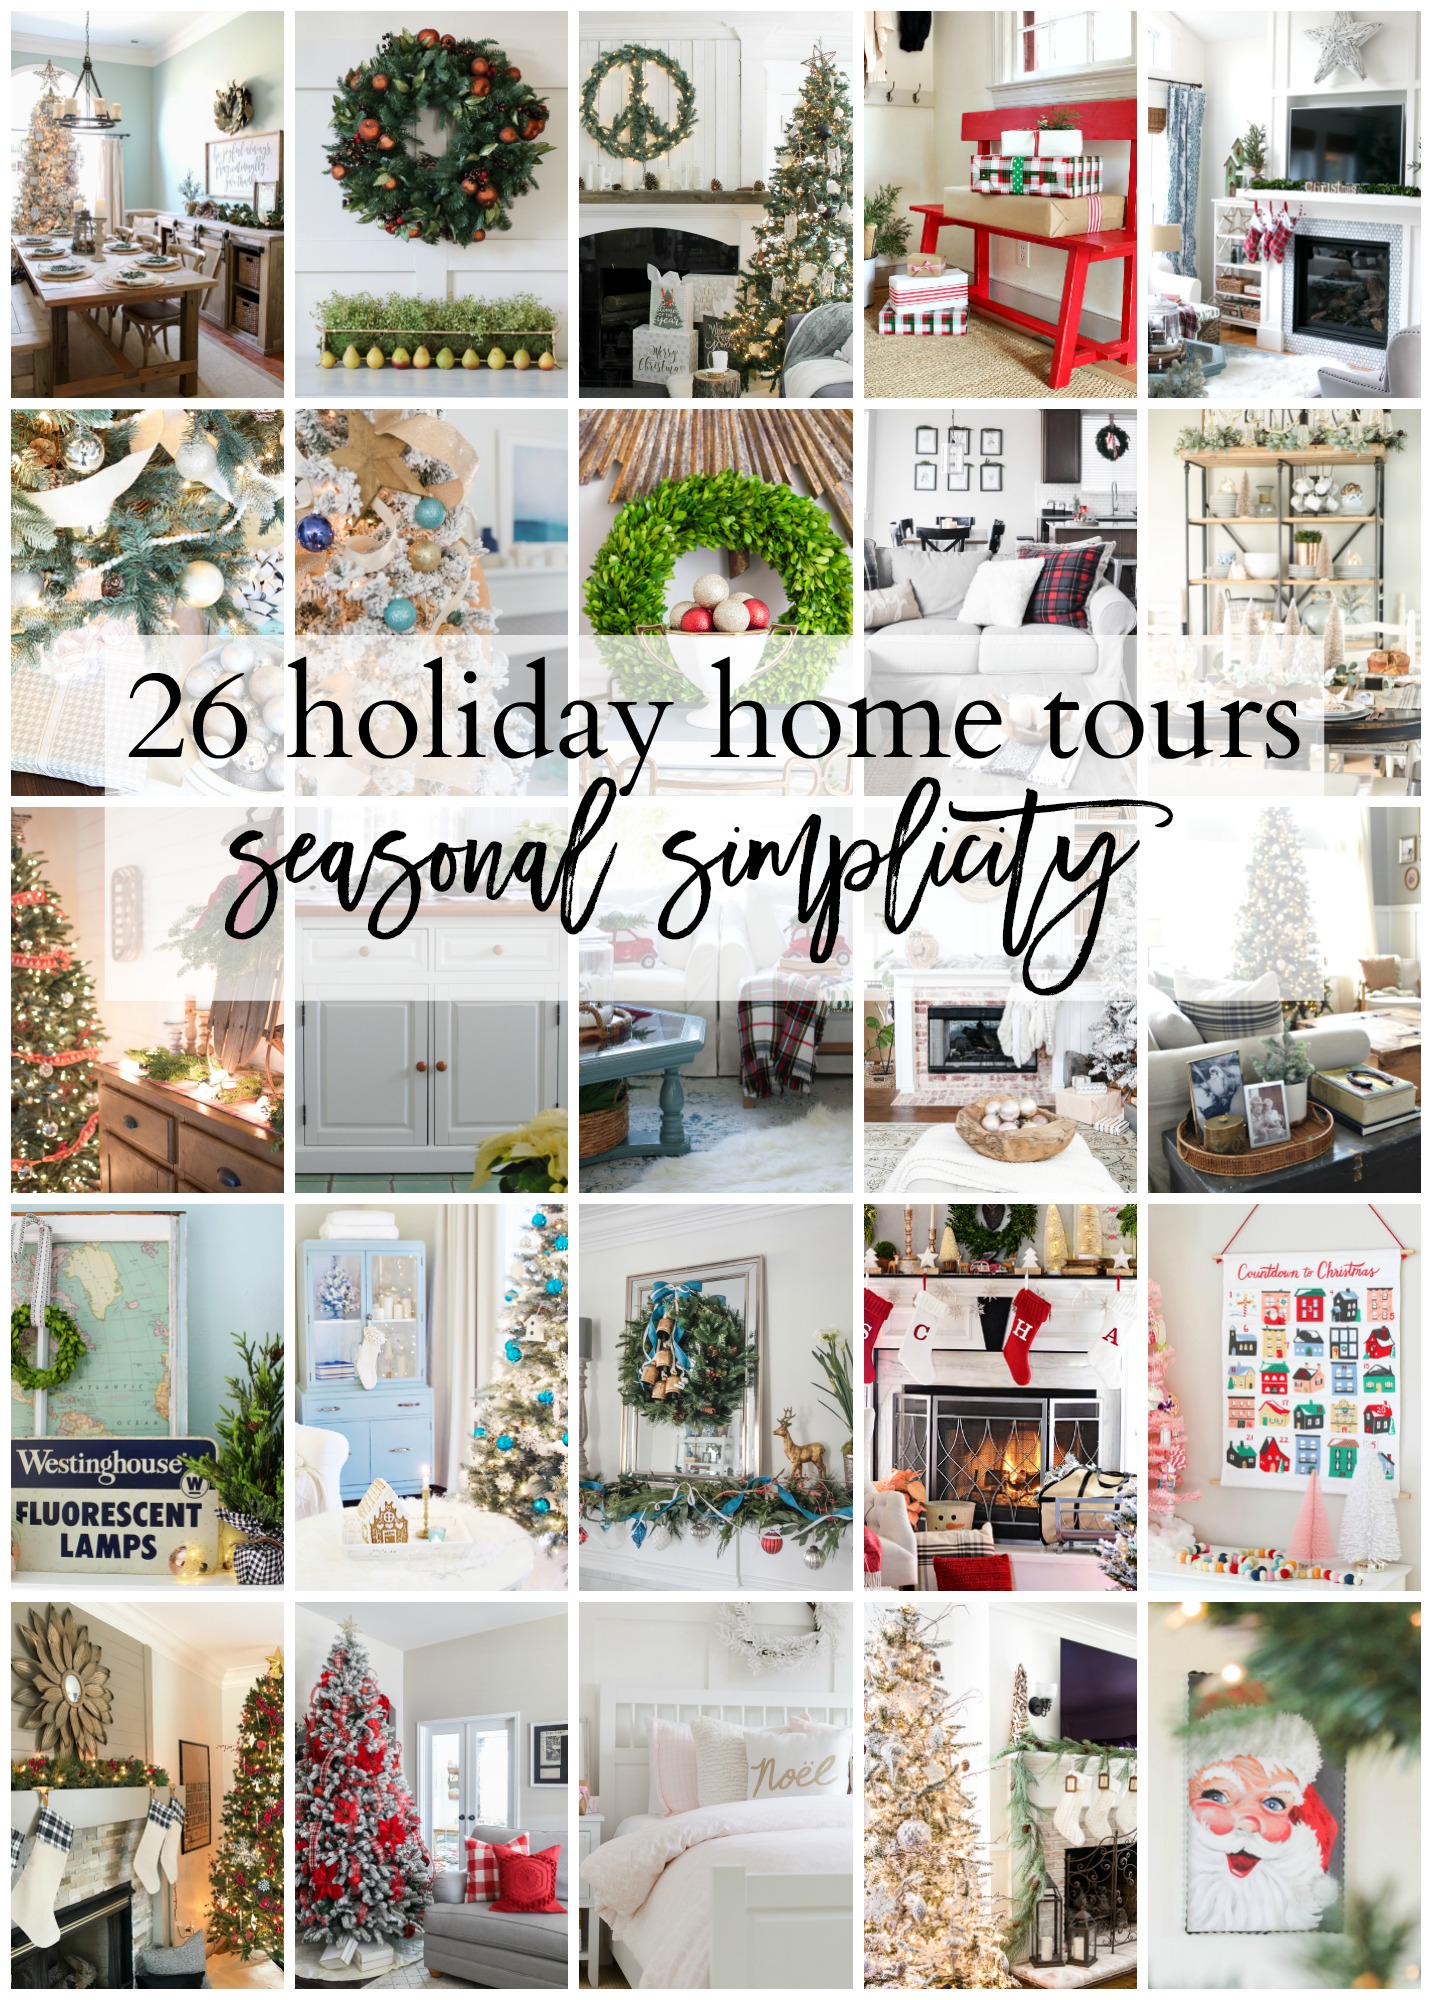 26 holiday home tours poster.